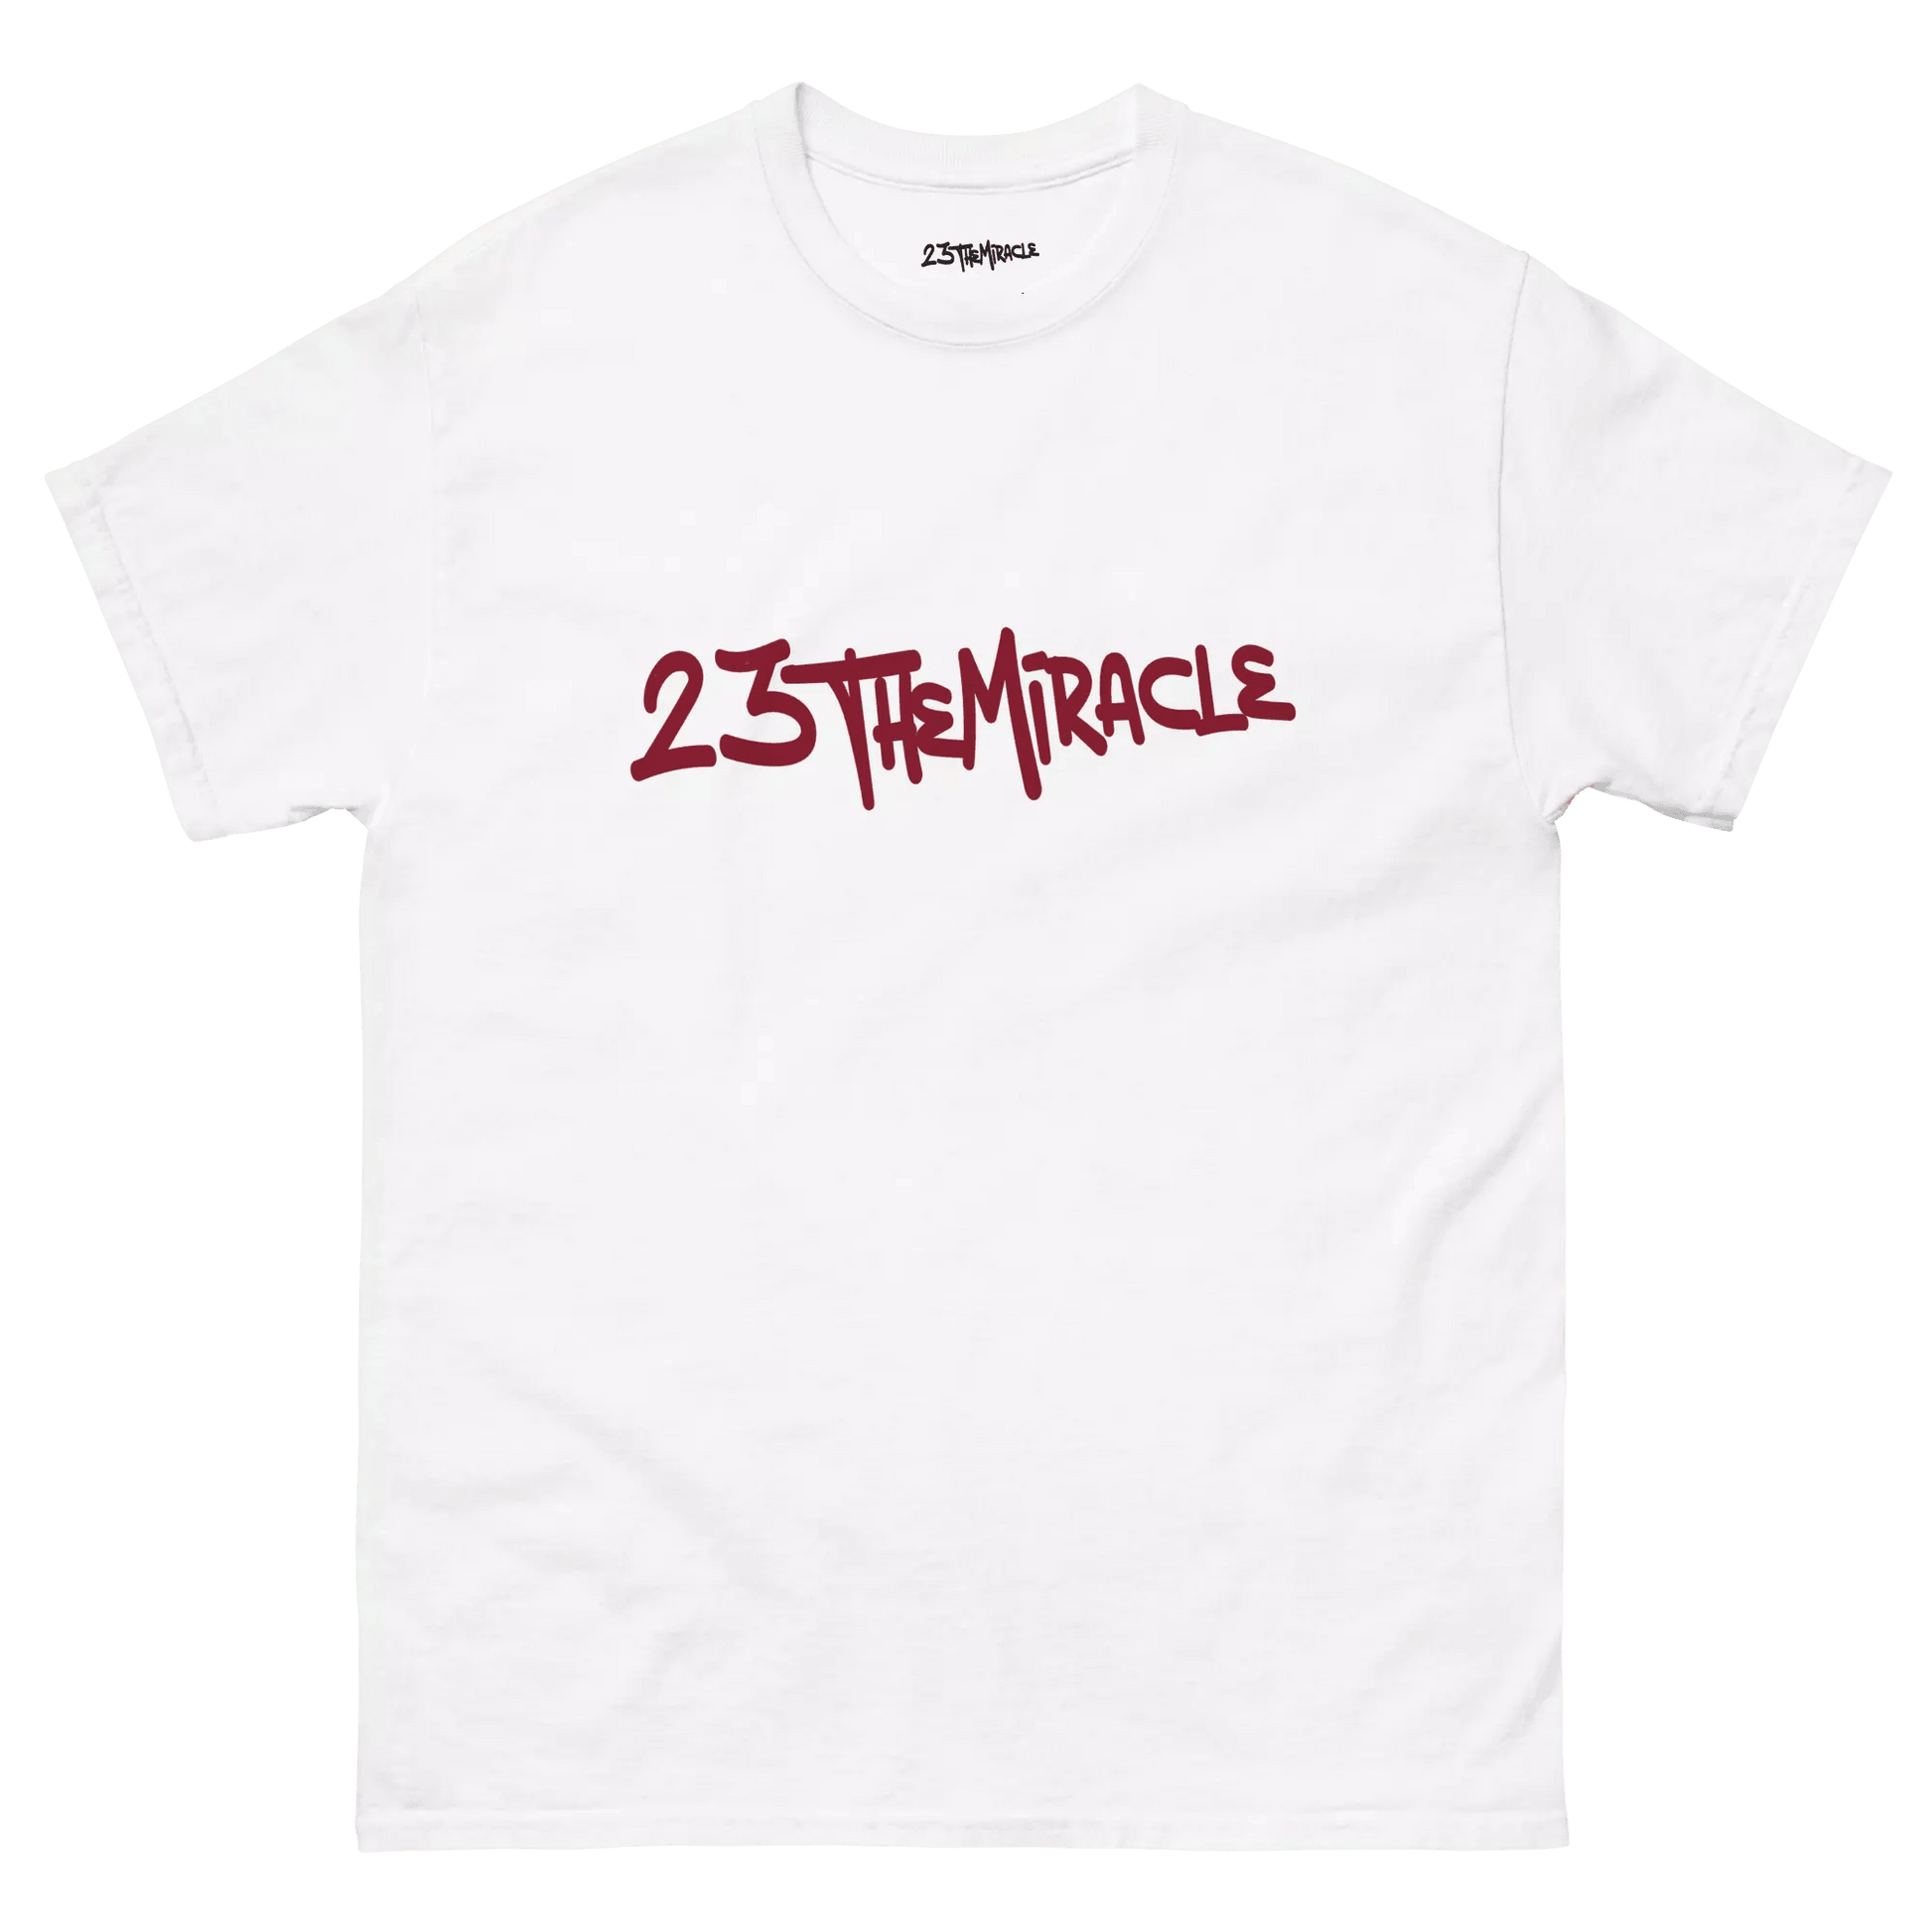 23 THEMIRACLE T-SHIRT - 23 TheMiracle